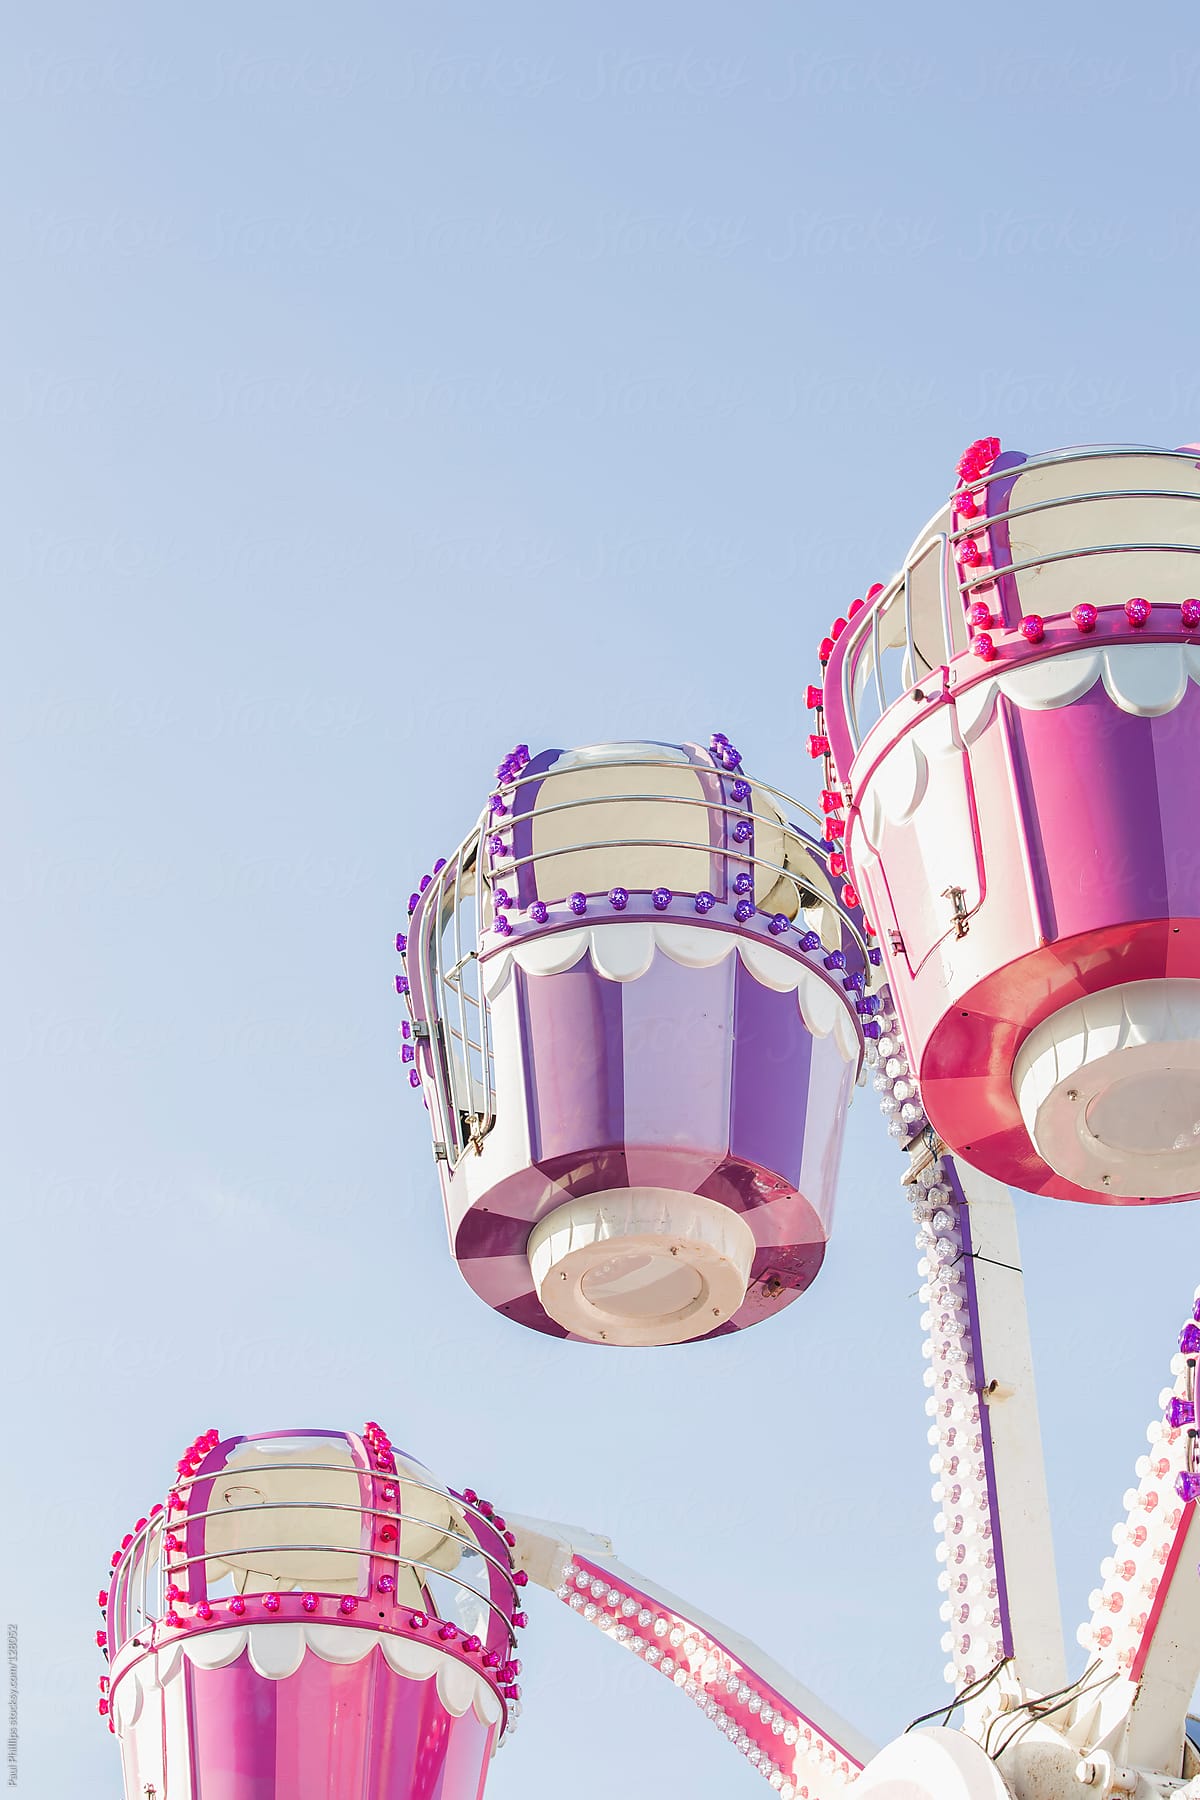 Small pastel children's ferris ride at a carnival